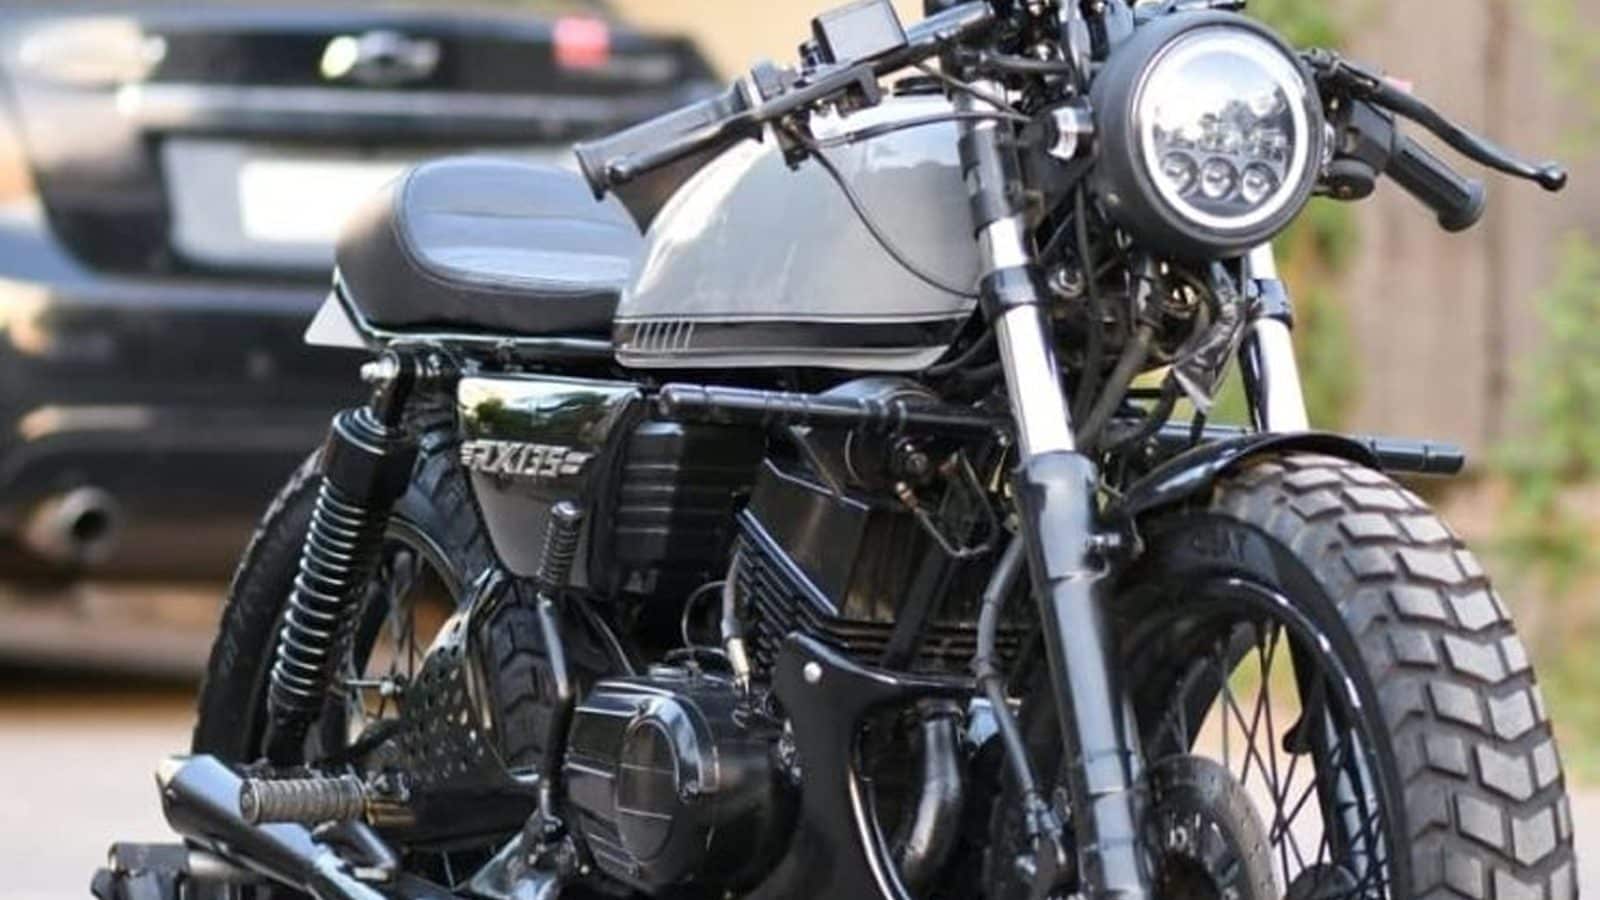 Yamaha Rx135 Modified Into A Modern Cafe Racer Is An Enthusiast S Delight